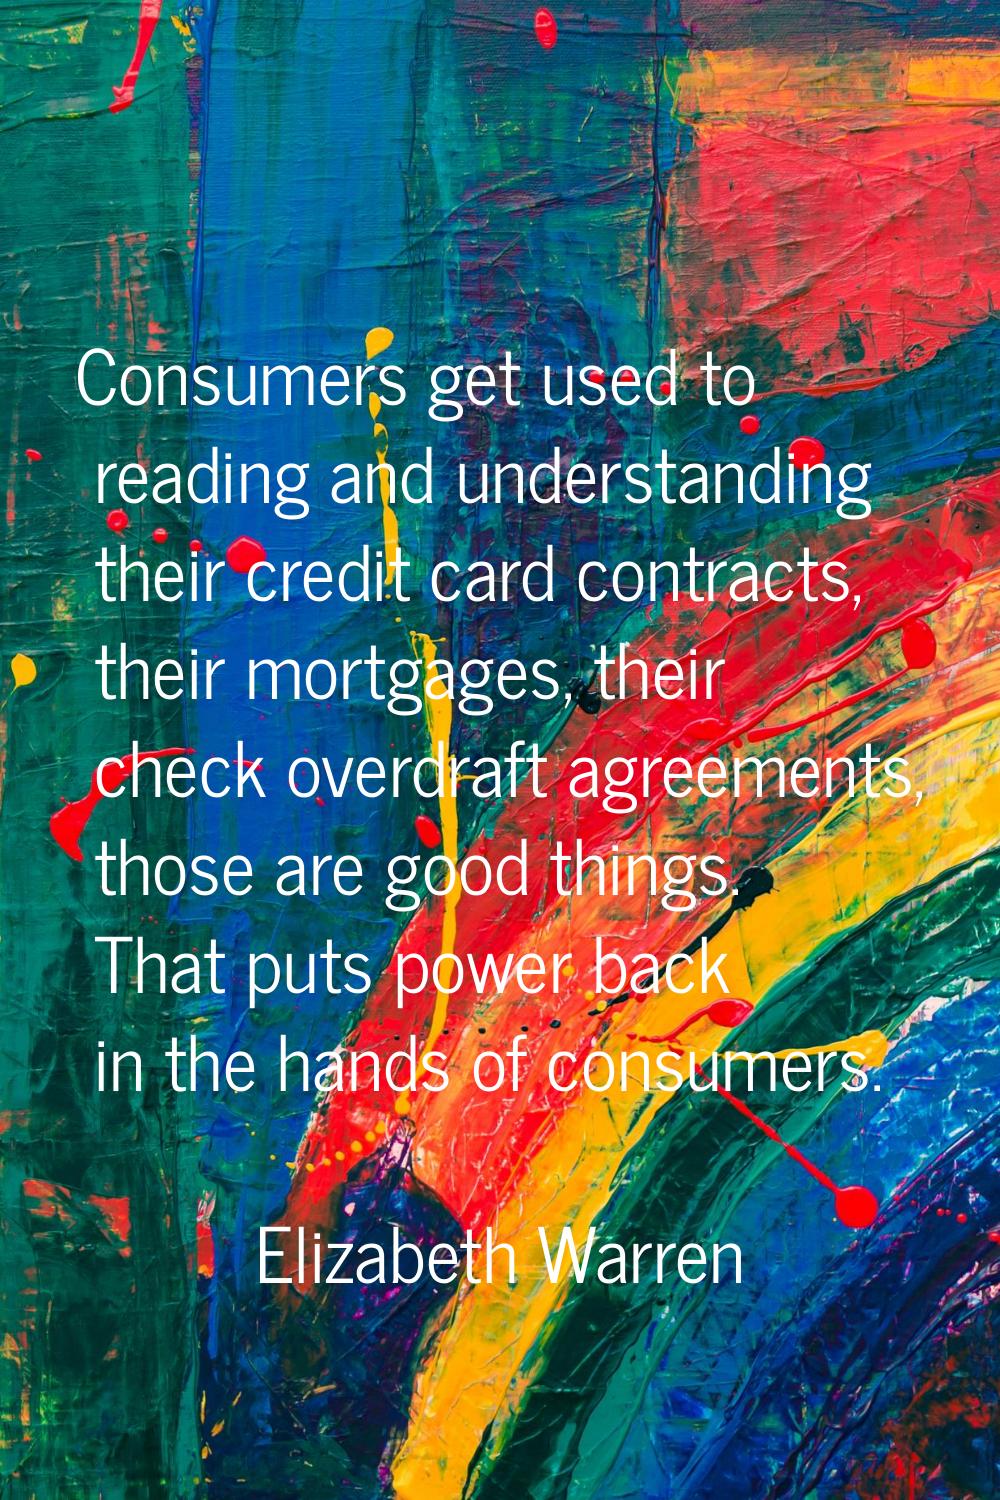 Consumers get used to reading and understanding their credit card contracts, their mortgages, their